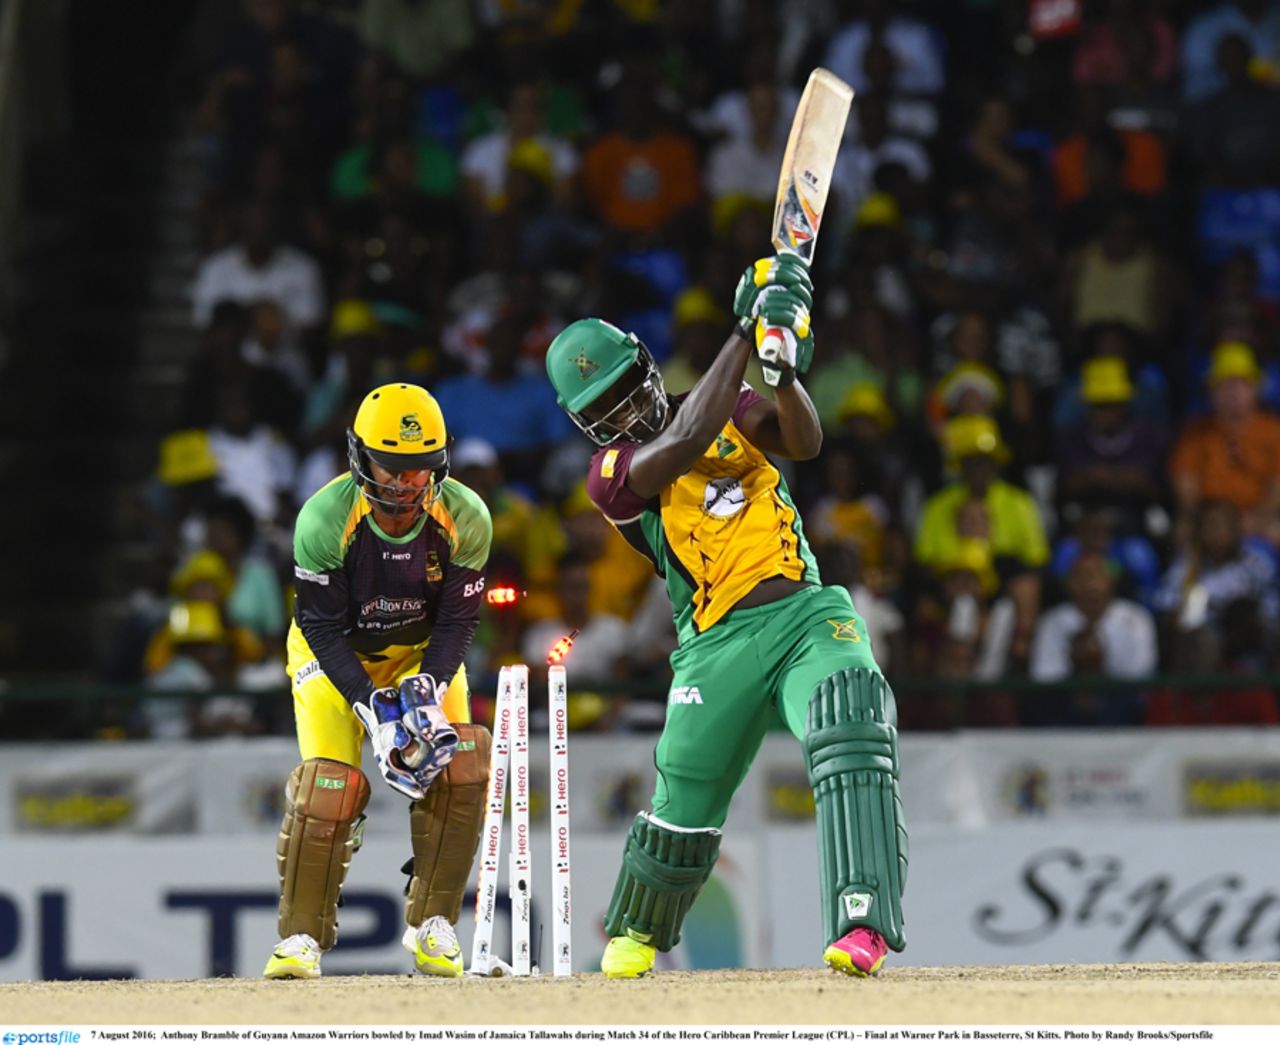 Anthony Bramble is bowled for a duck after a wild swipe, CPL 2016, final, St Kitts, August 7, 2016